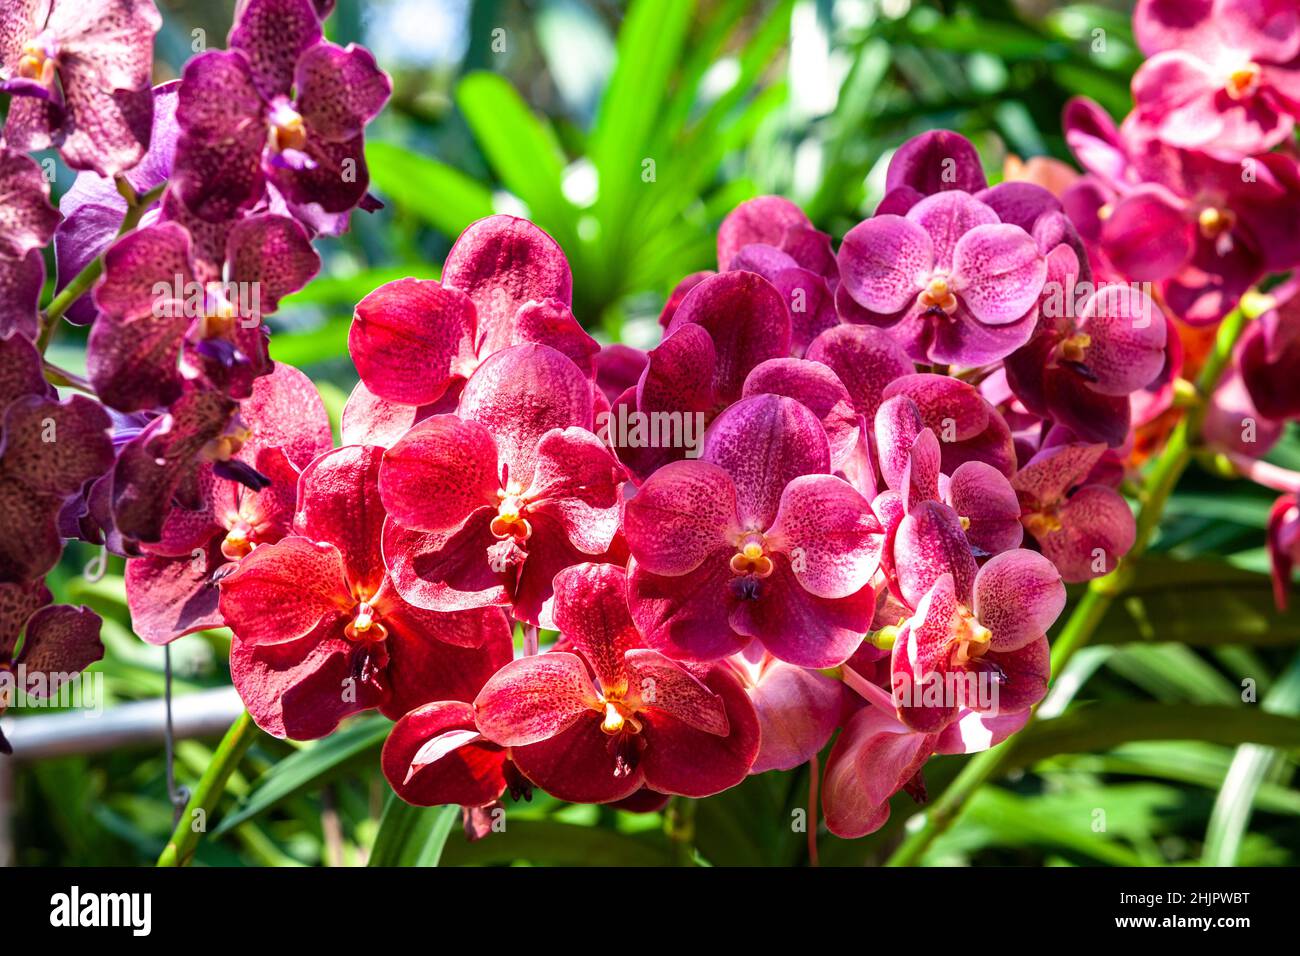 Vanda Orchid Wanda - Queen of orchids,Beautiful purple flower organic purple orchid flowers blooming in blurred background in the nature garden .Orchi Stock Photo